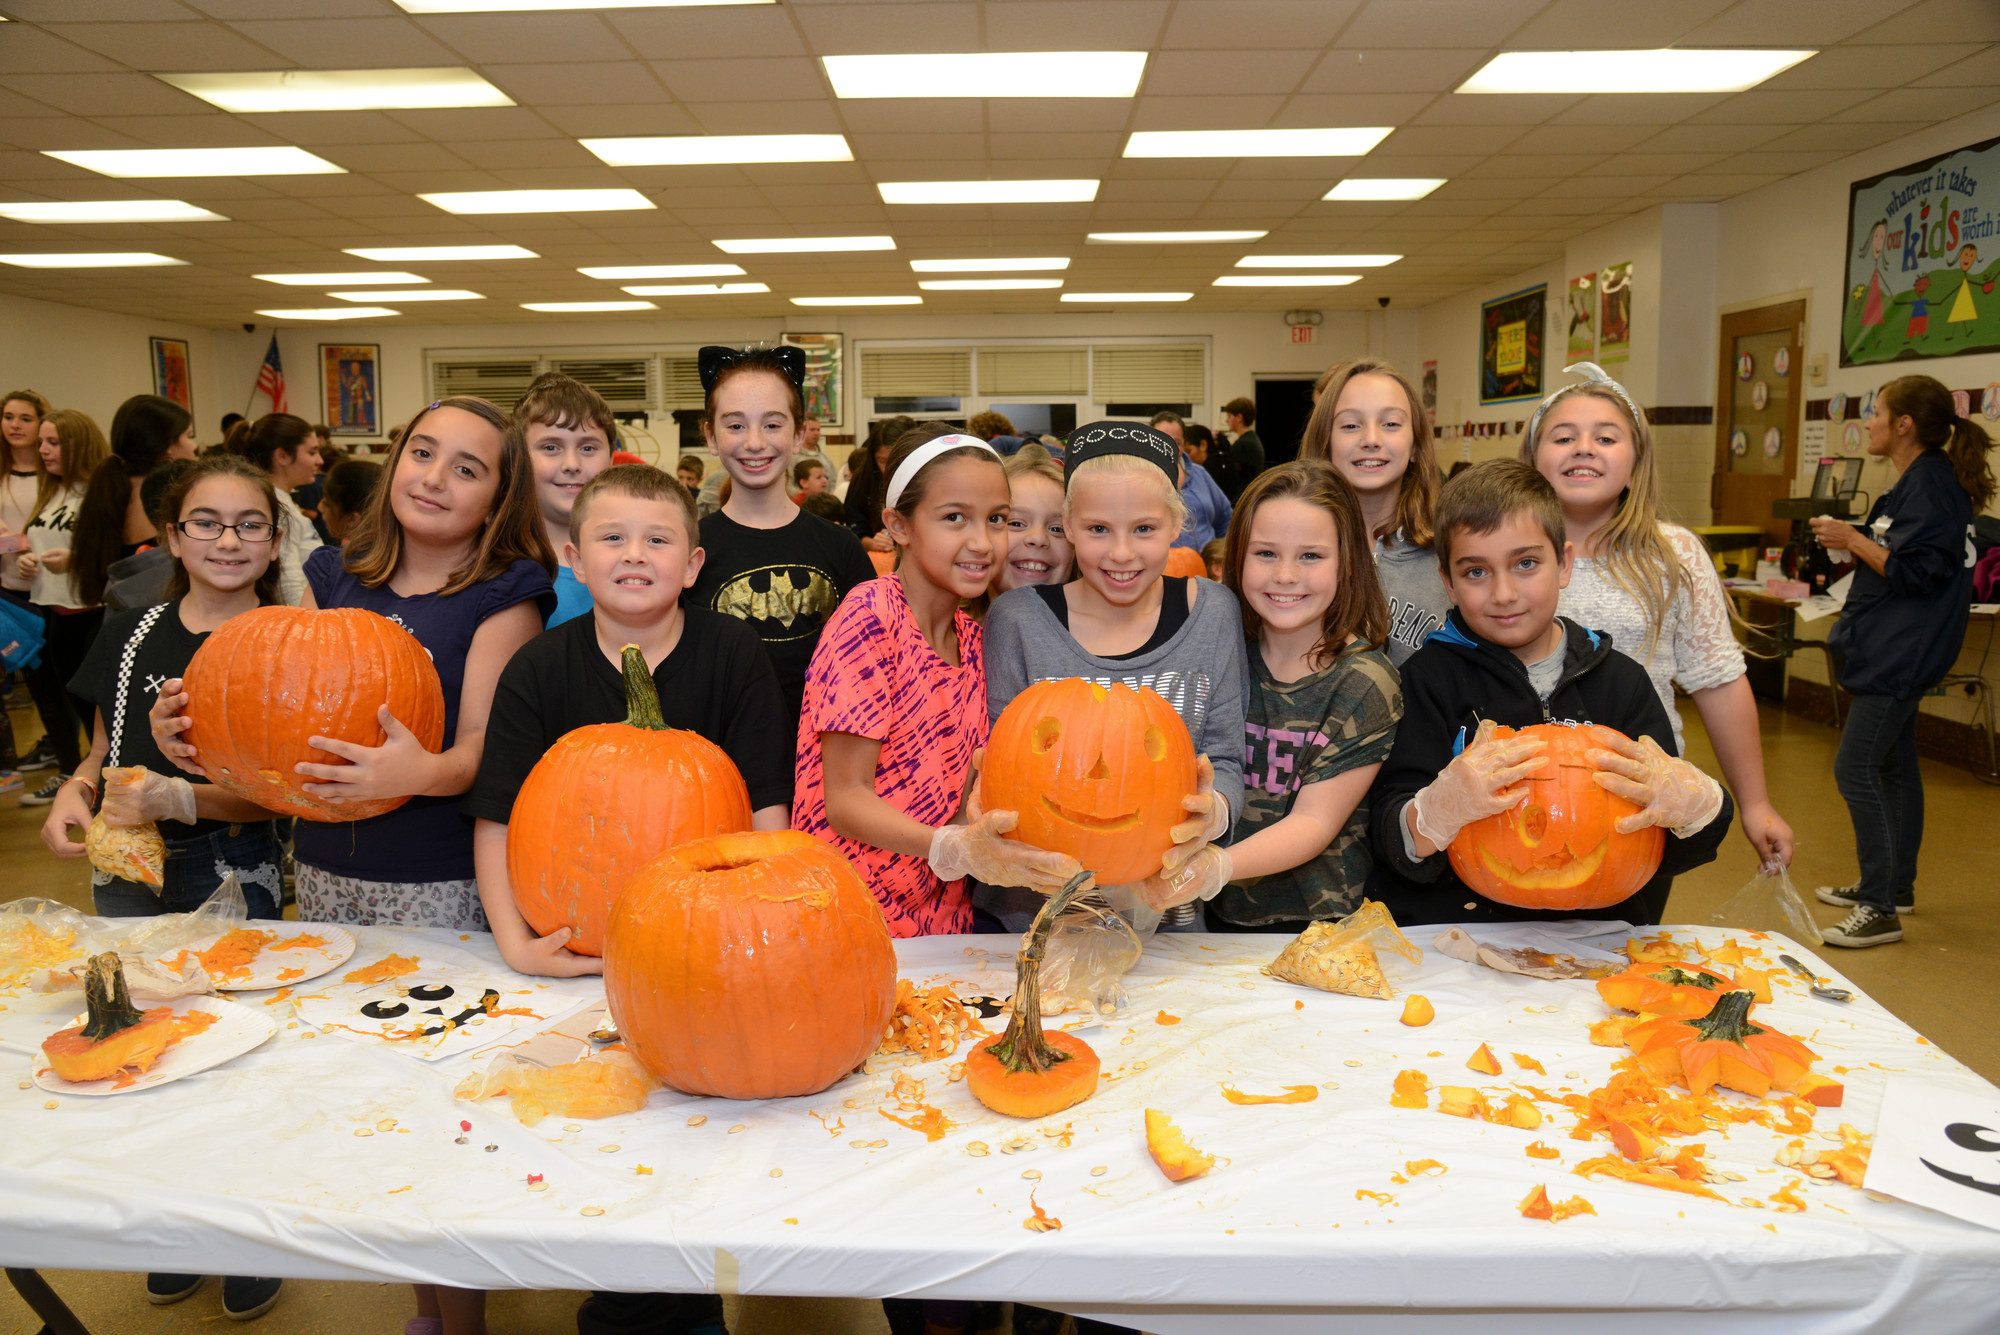 Students at School No. 6 during the Halloween decorating event sponsored by the Kiwanis Club and the Department of Community Activities.